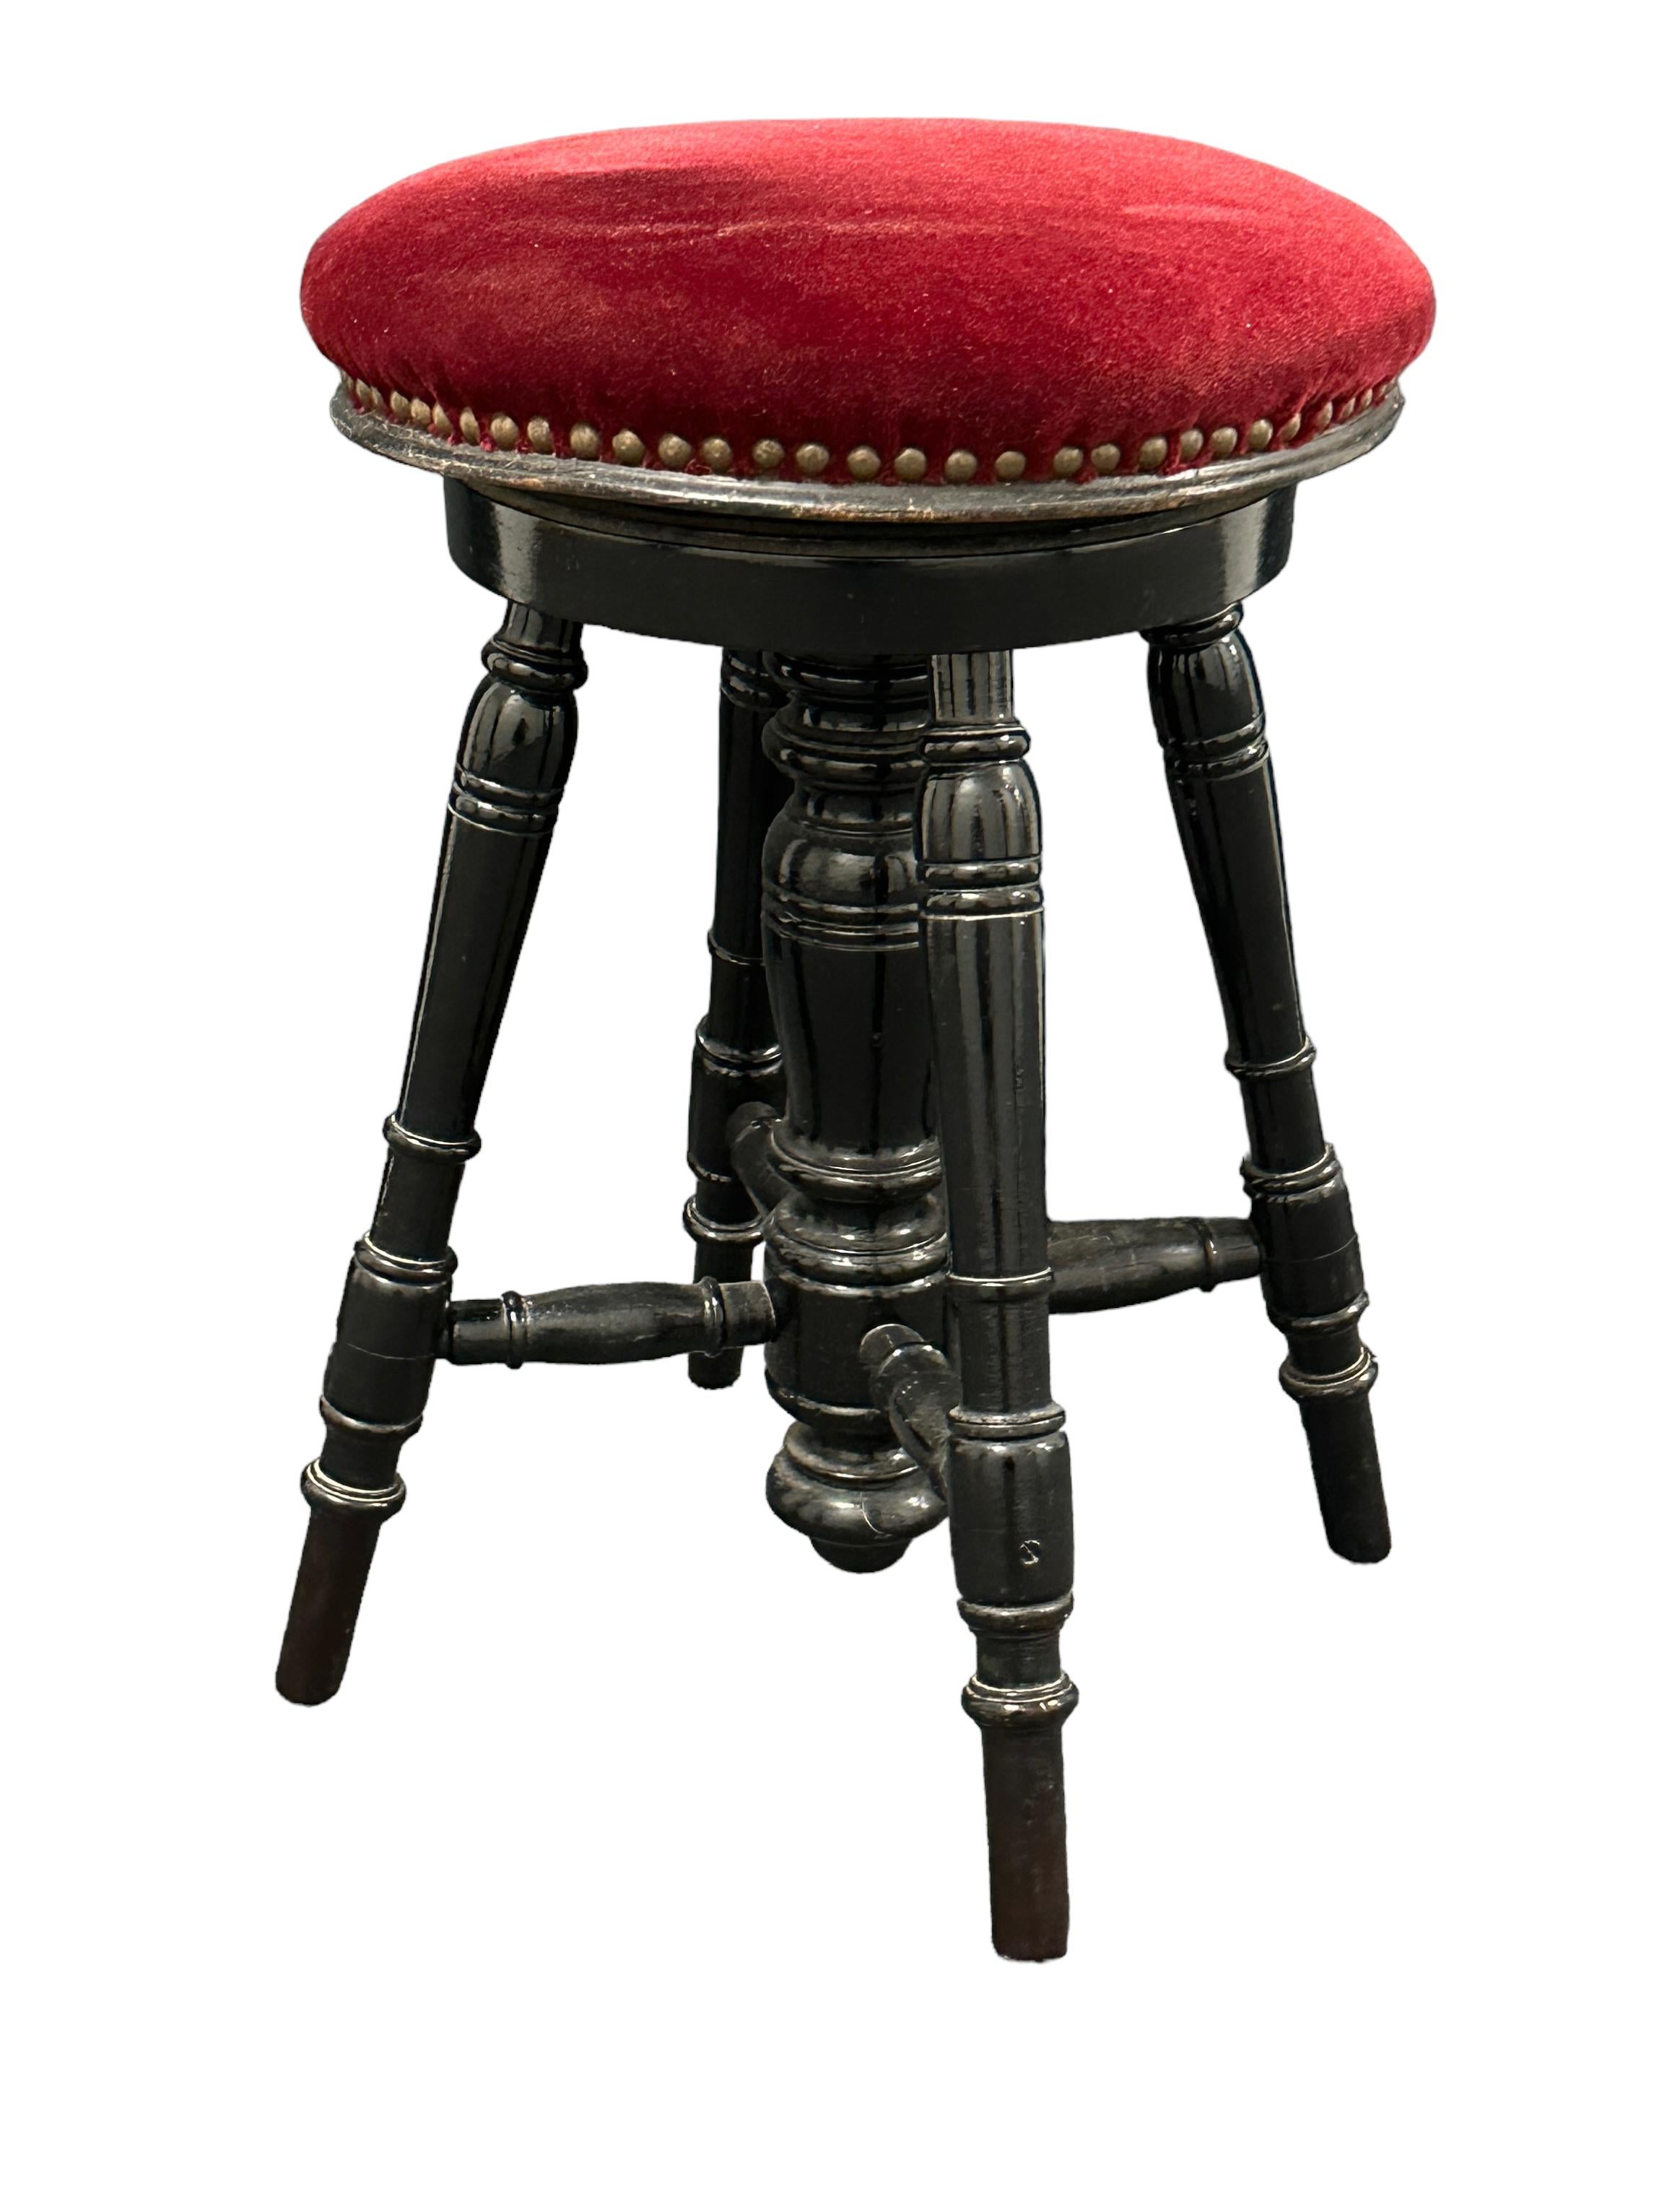 Early 20th Century Swivel Piano Stool with Red Velvet Seat, Belgium For Sale 3